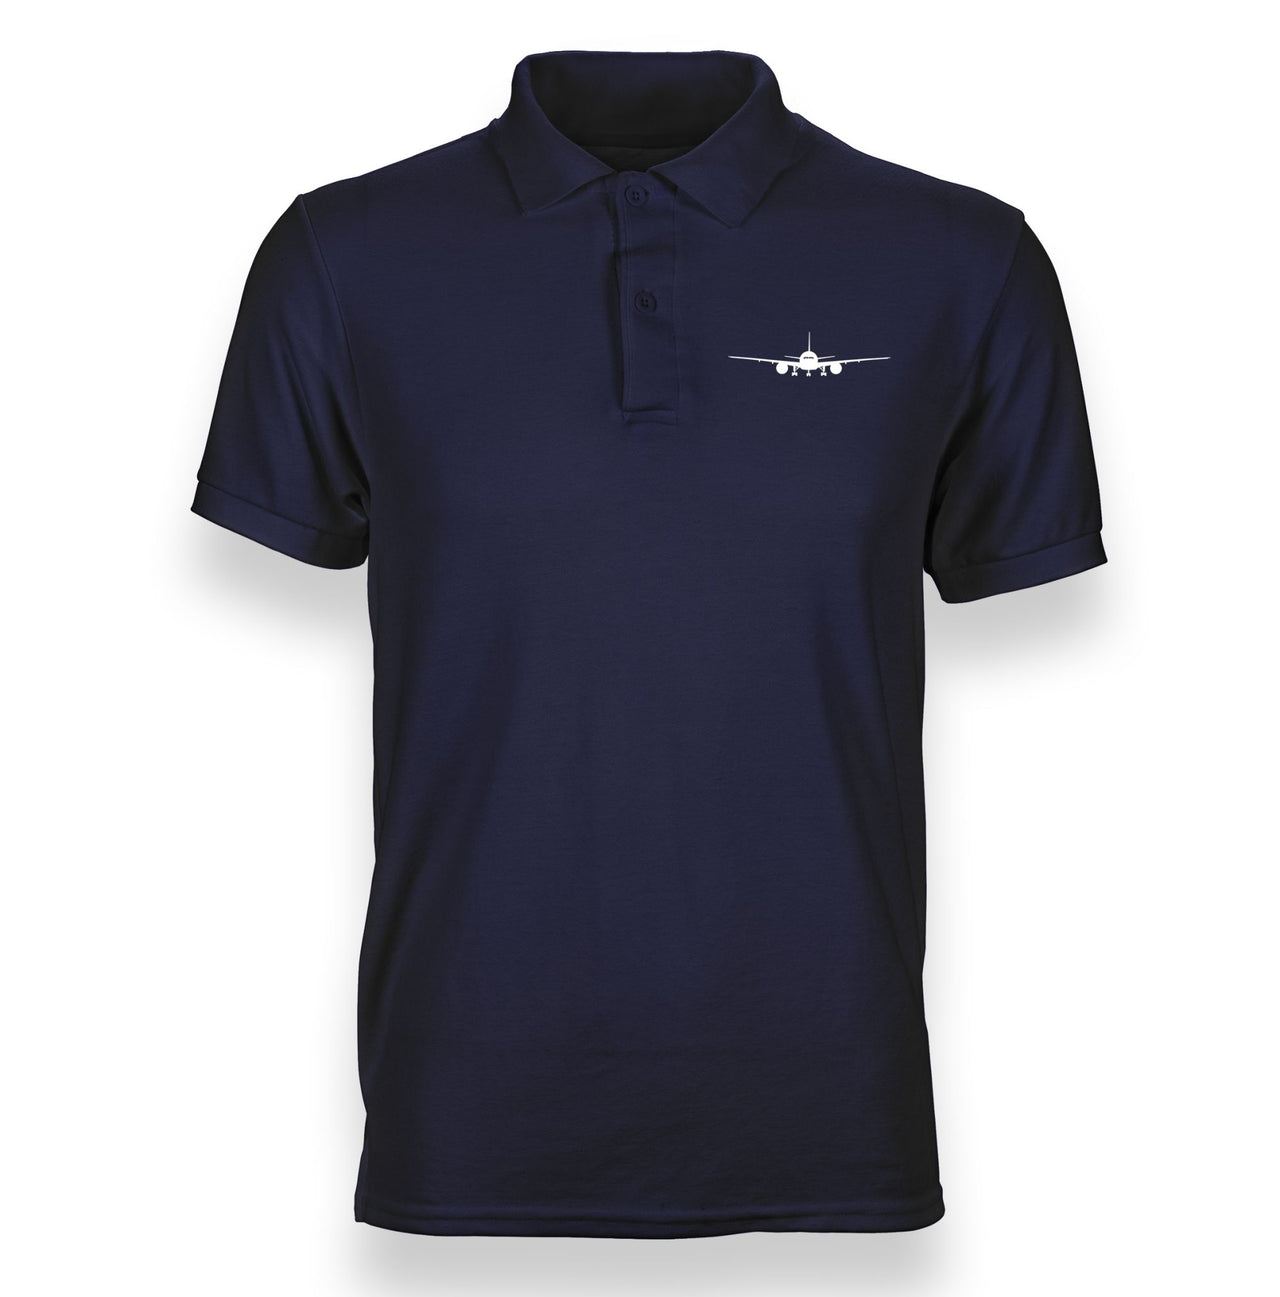 Boeing 777 Silhouette Designed "WOMEN" Polo T-Shirts